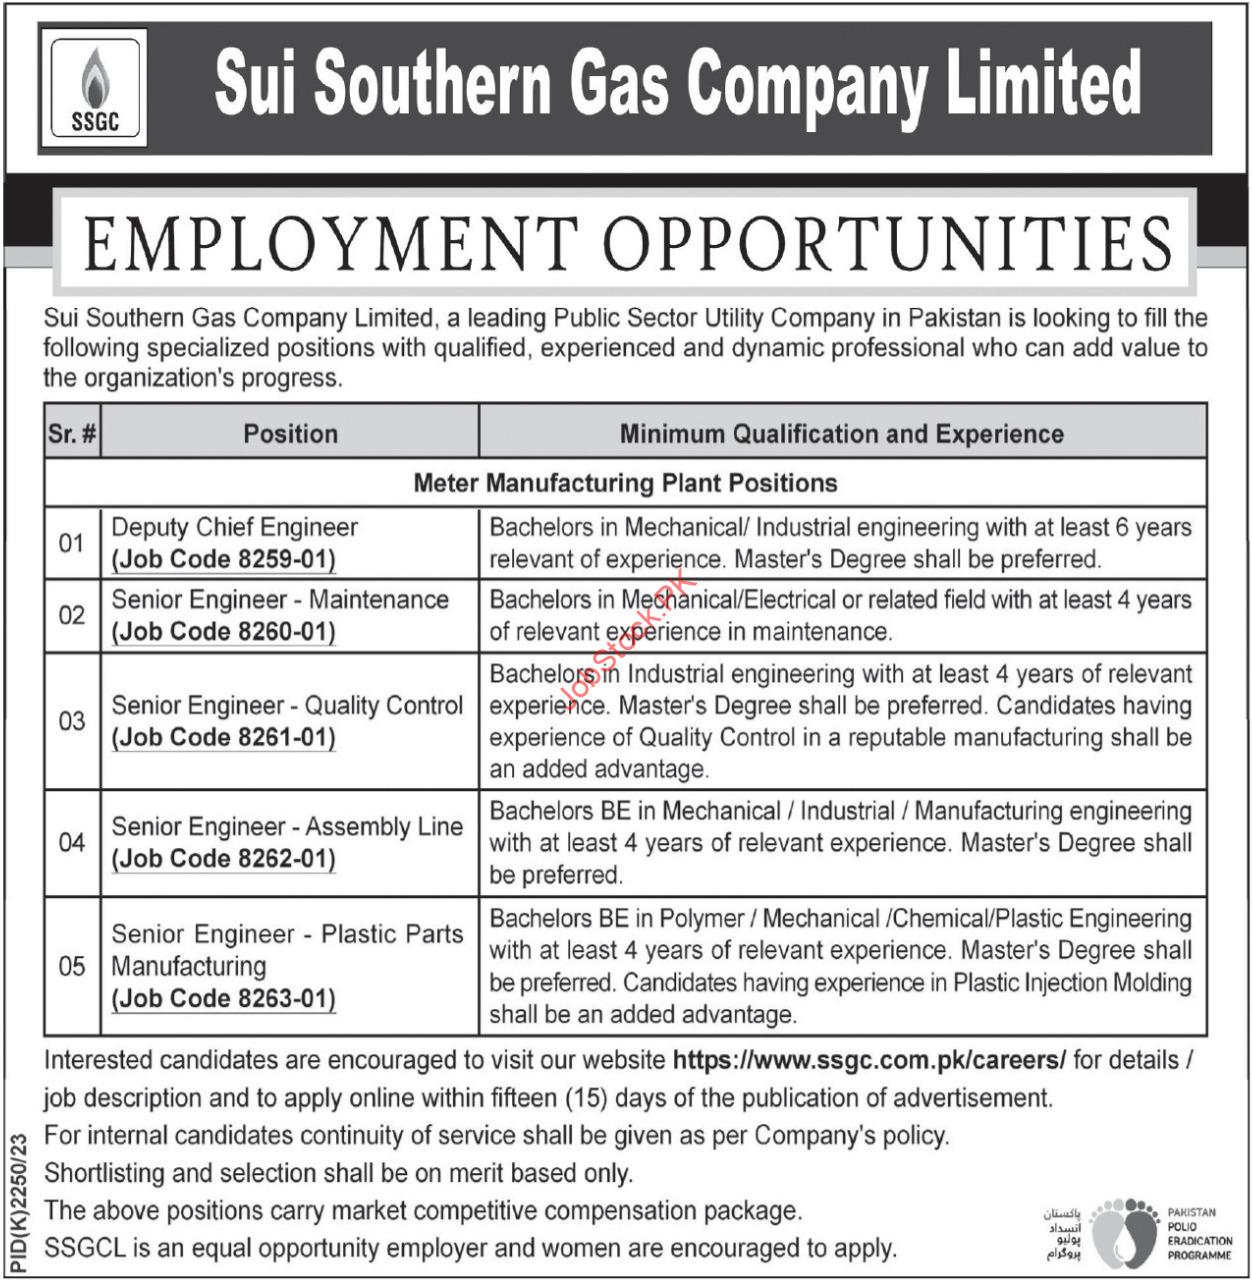 Job Opportunities at Sui Southern Gas Company Limited SSGC